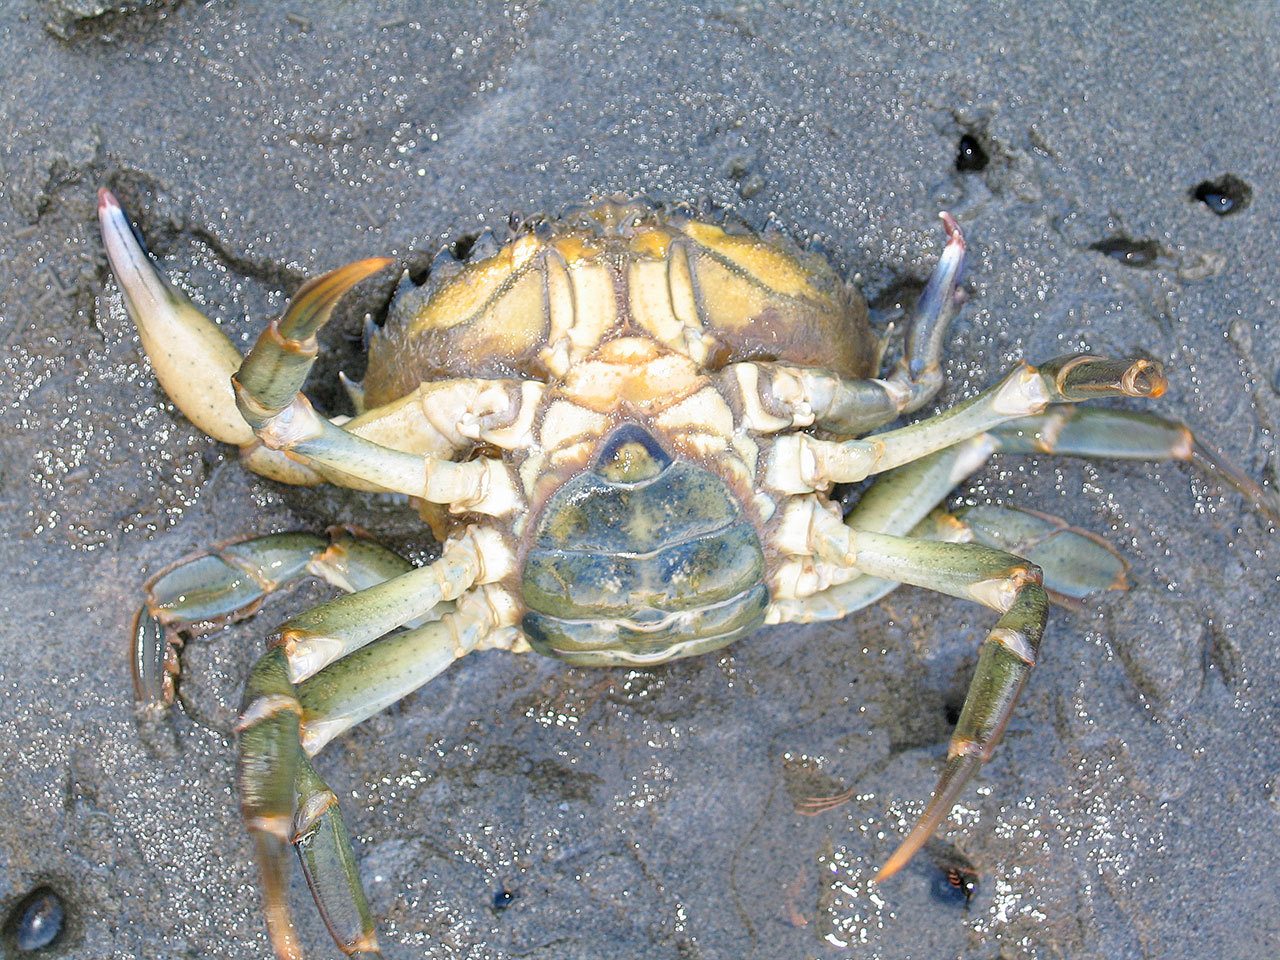 Scientists are asking the public to watch out for European green crabs in the Strait of Juan de Fuca and in Puget Sound. The Washington Sea Grant crab team has been monitoring for the invasive crab and hasn’t found any. (Washington Sea Grant)